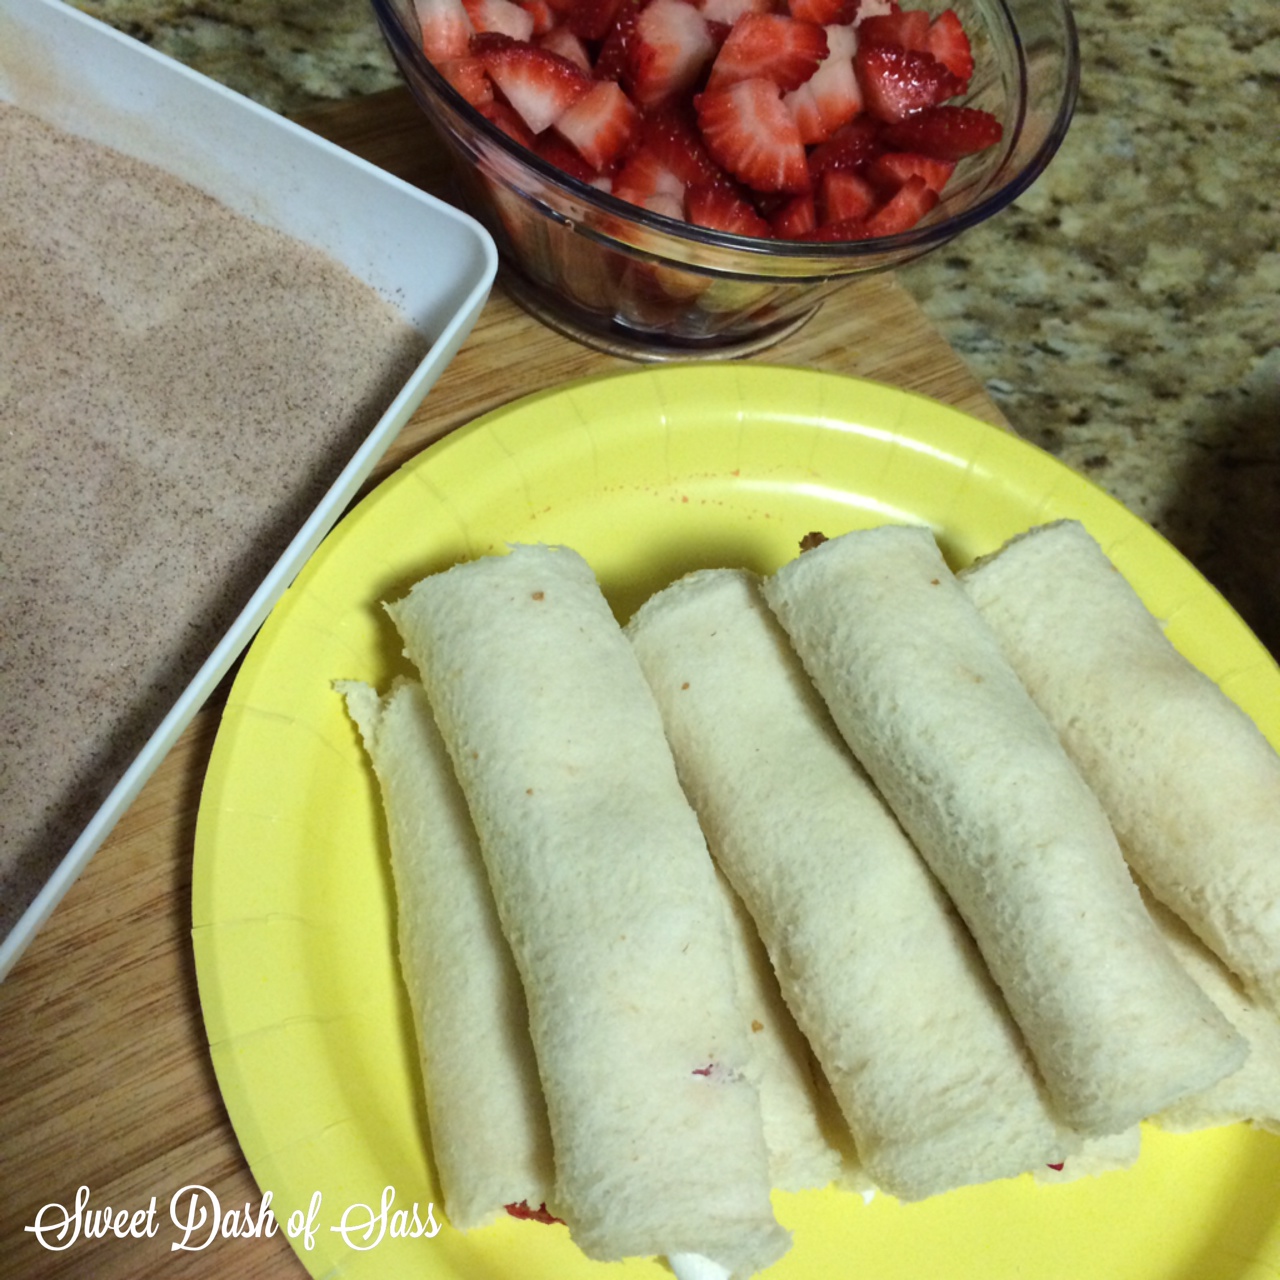 Strawberry Cinnamon French Toast Roll-ups - www.SweetDashofSass.com - so easy and delicious - will definitely make again!